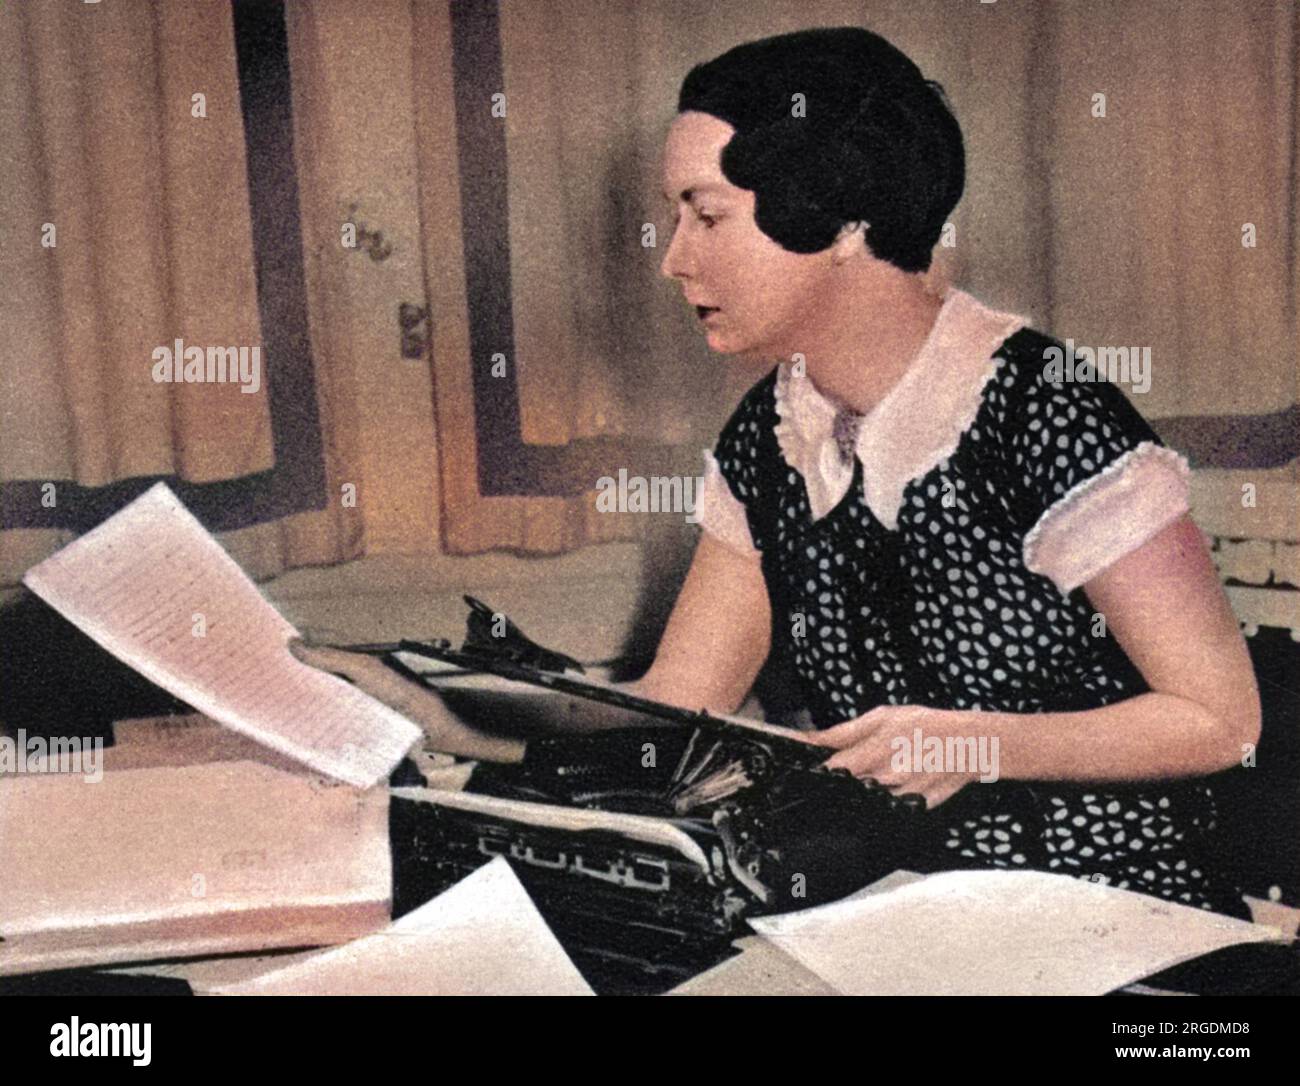 Margaret Mitchell (1900-1949), American author best known for 'Gone with the Wind', pictured hard at work at her typewriter. Stock Photo